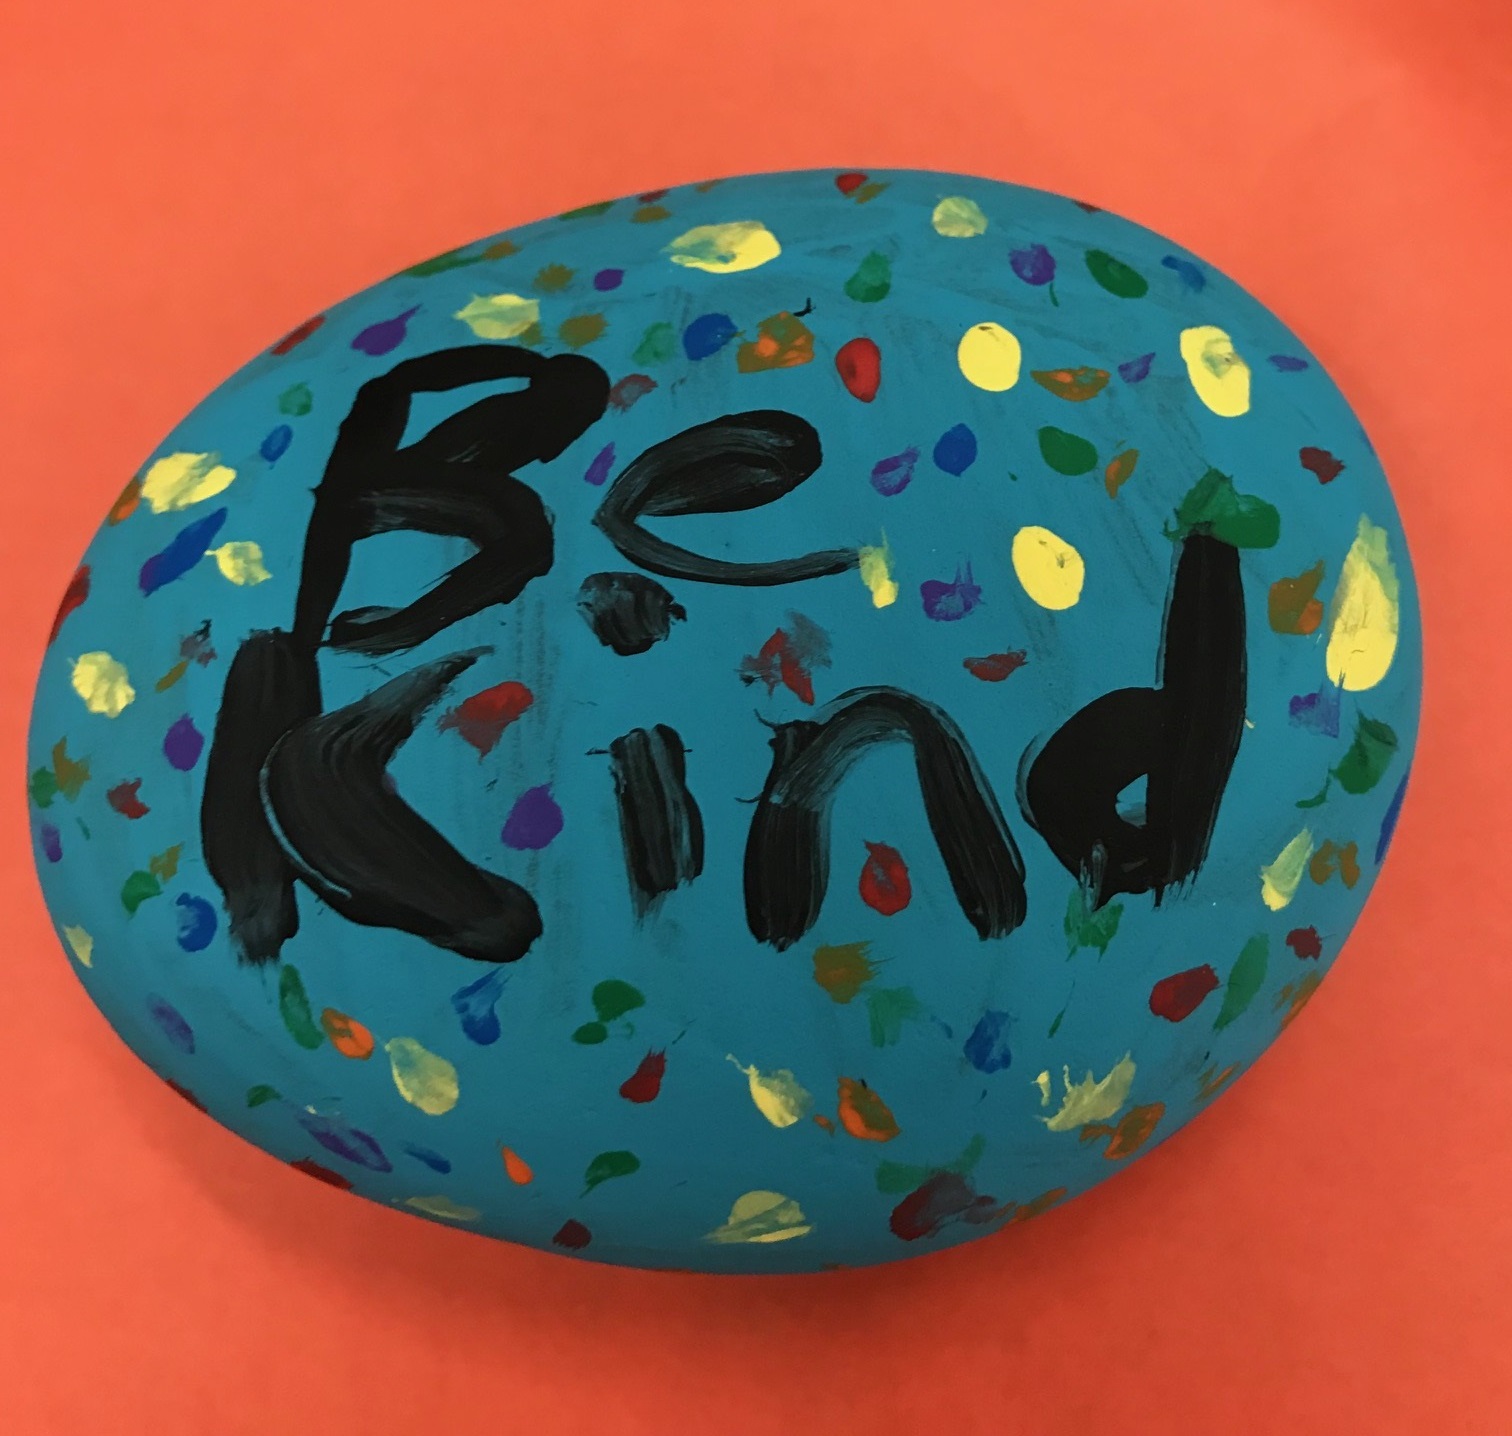 "Be Kind" Painted on a Stone